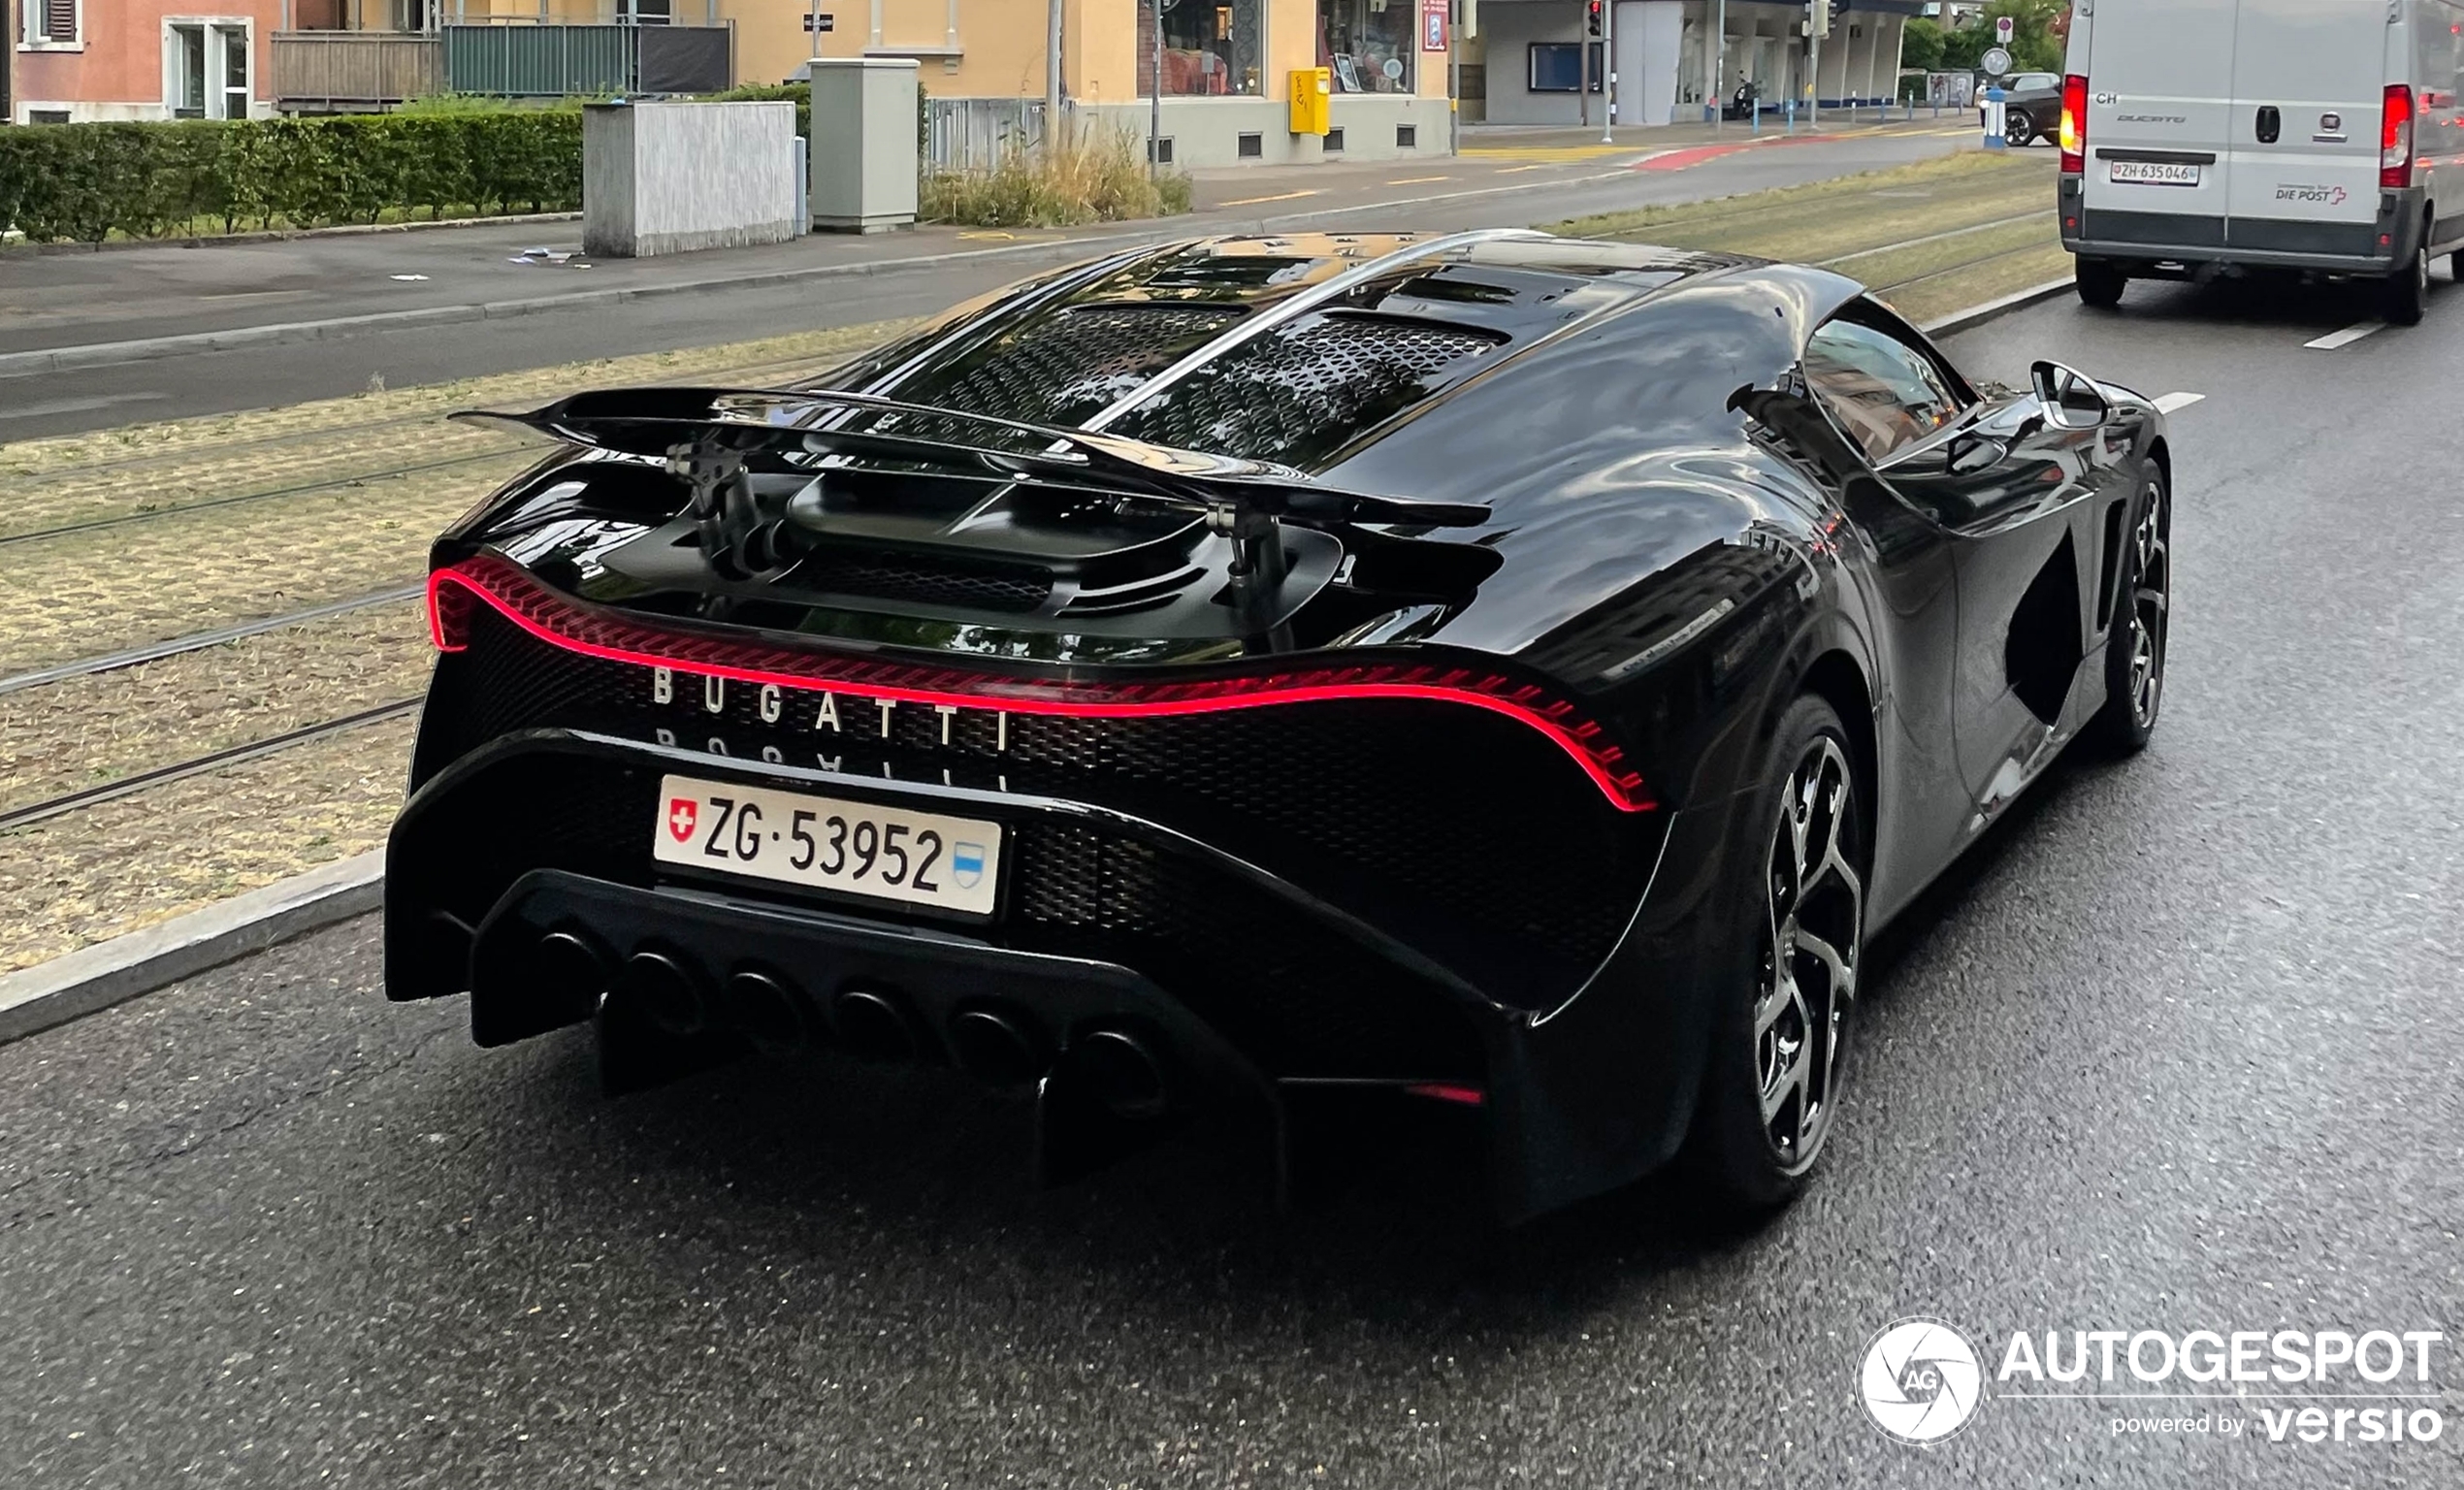 The one and only La Voiture Noire shows up in Zurich